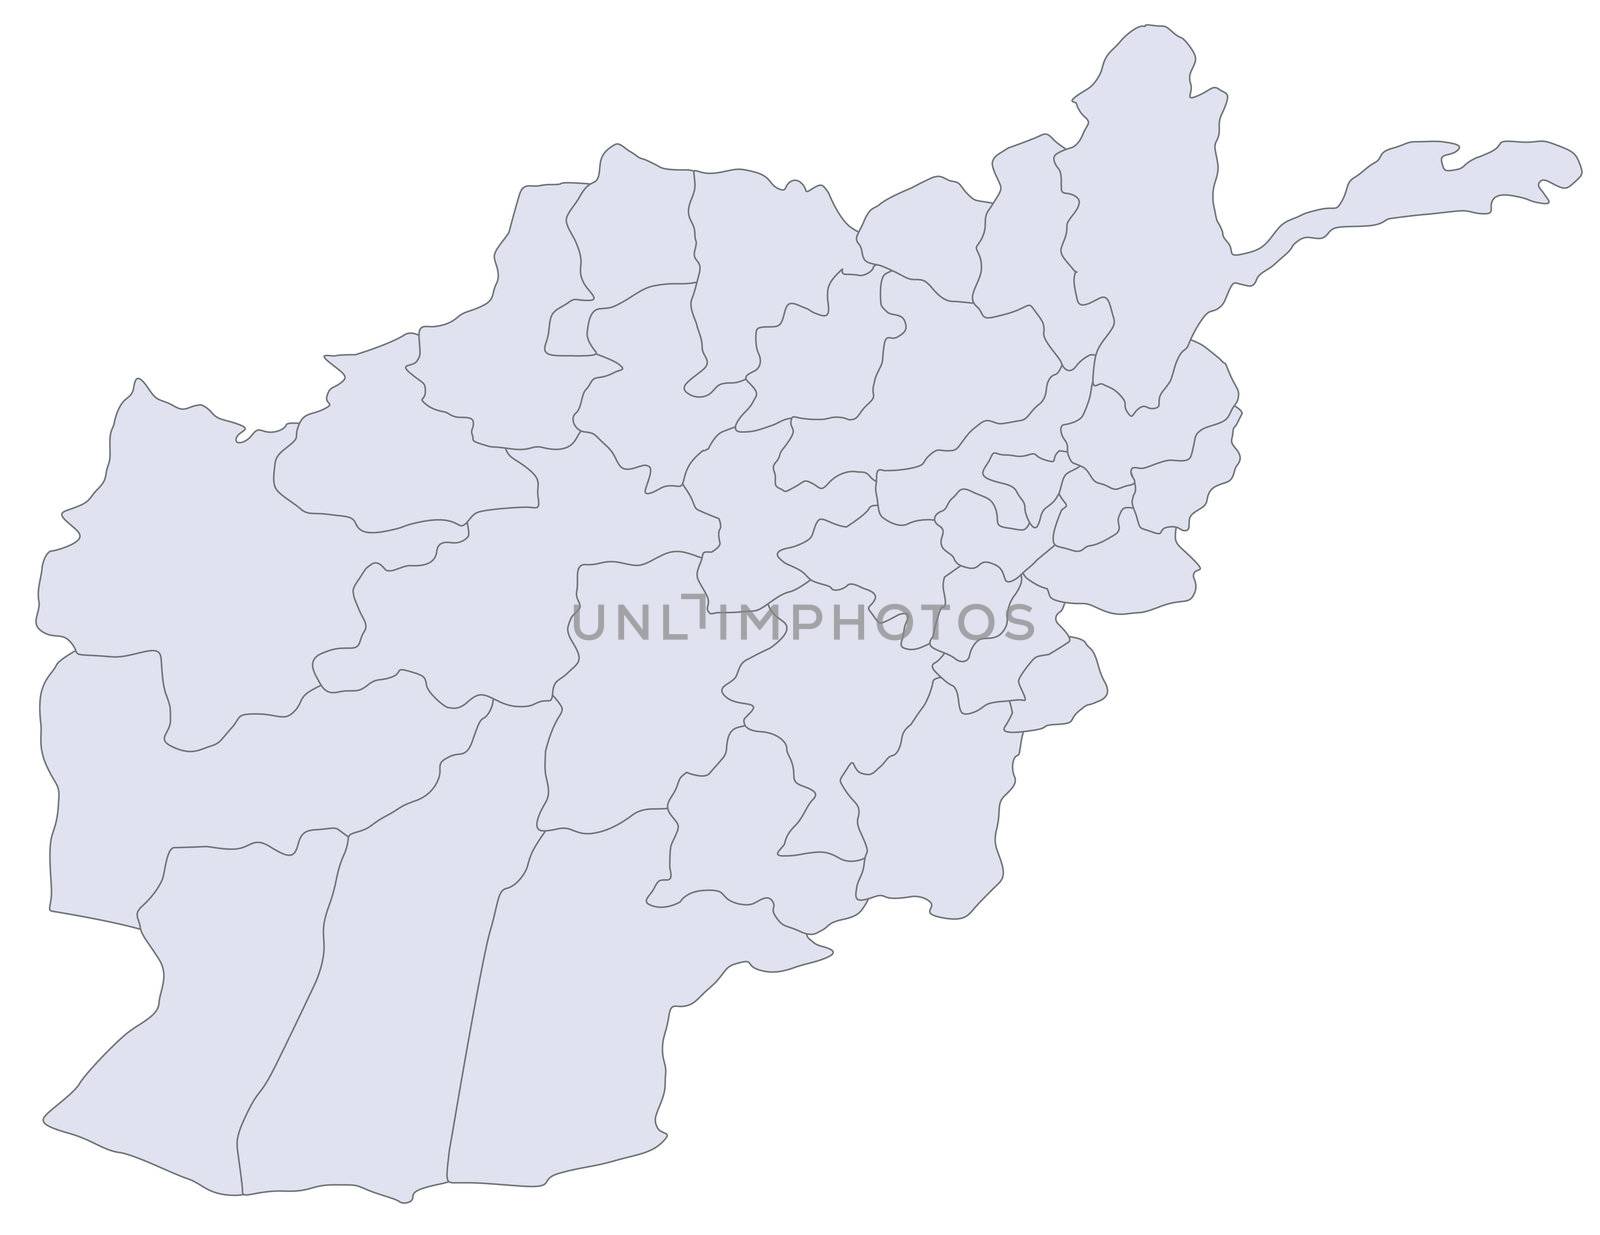 A stylized map of Afghanistan showing the different provinces.